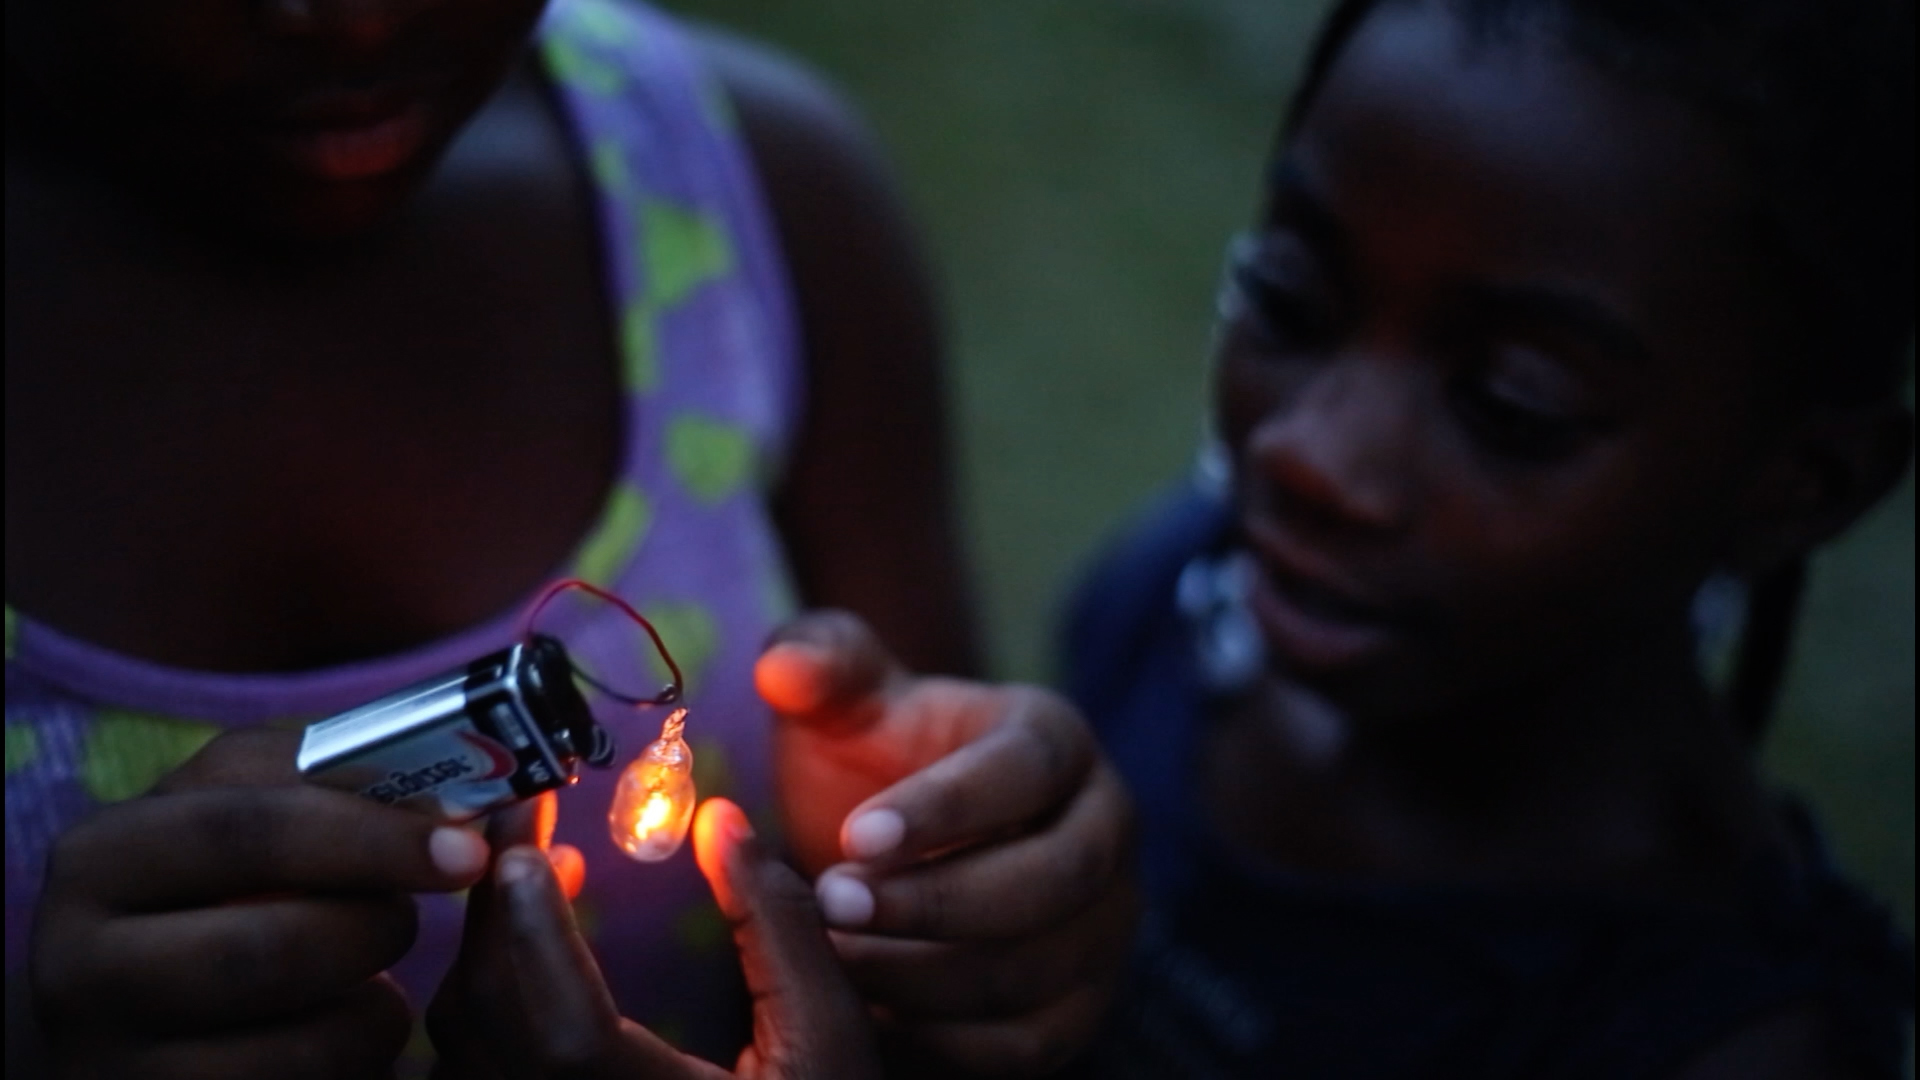 A still of two children powering a small light with a 9-volt battery from the 2018 documentary Hale County This Morning, This Evening by director RaMell Ross